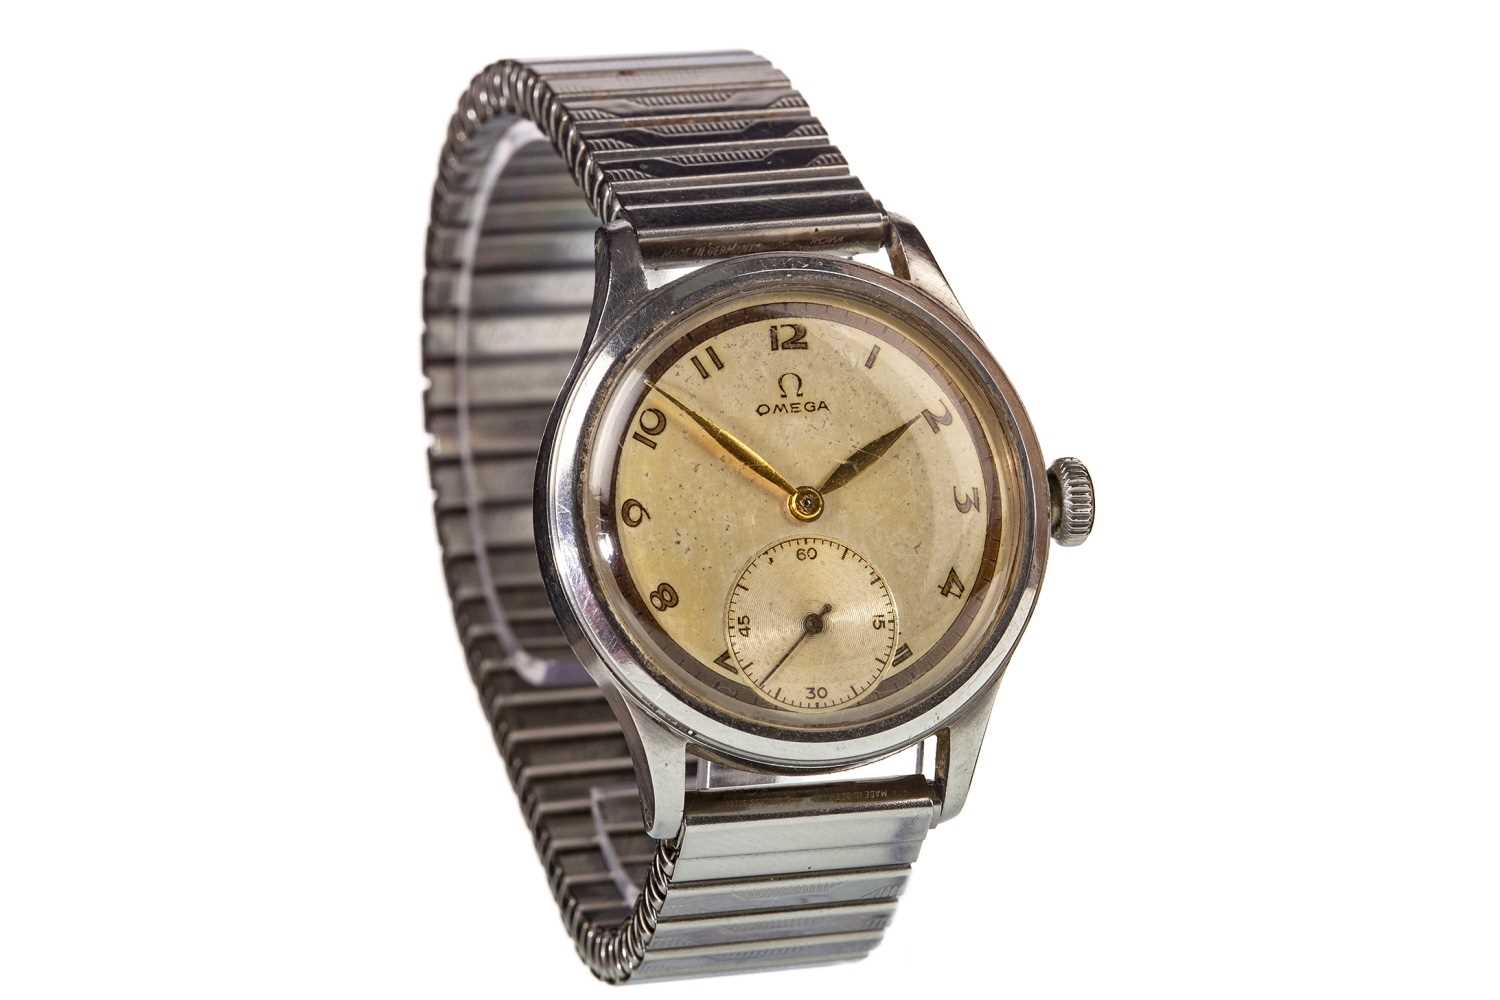 Lot 755 - A GENTLEMAN'S LATE 1930S OMEGA WATCH